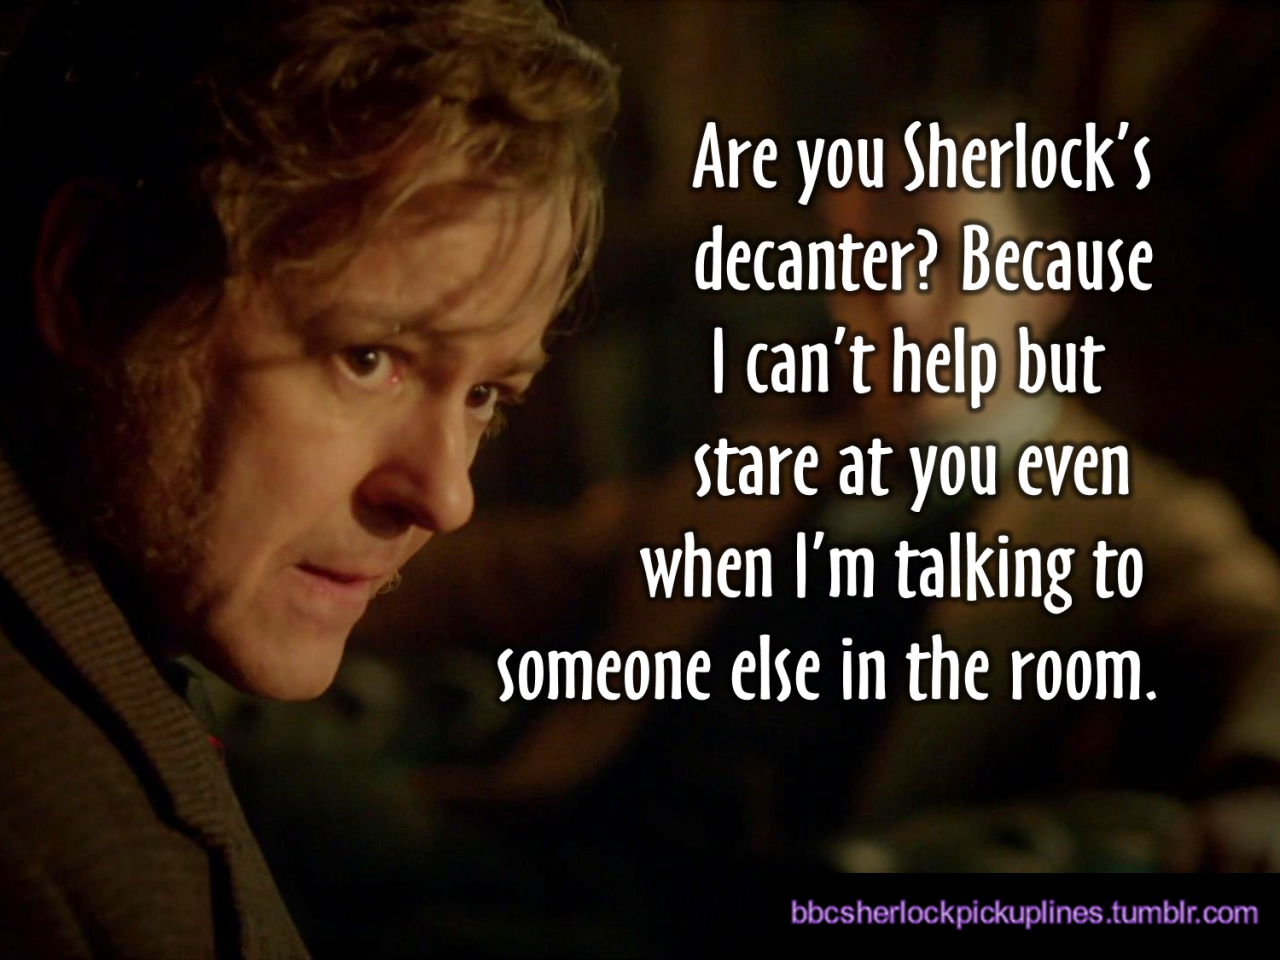 â€œAre you Sherlockâ€™s decanter? Because I canâ€™t help but stare